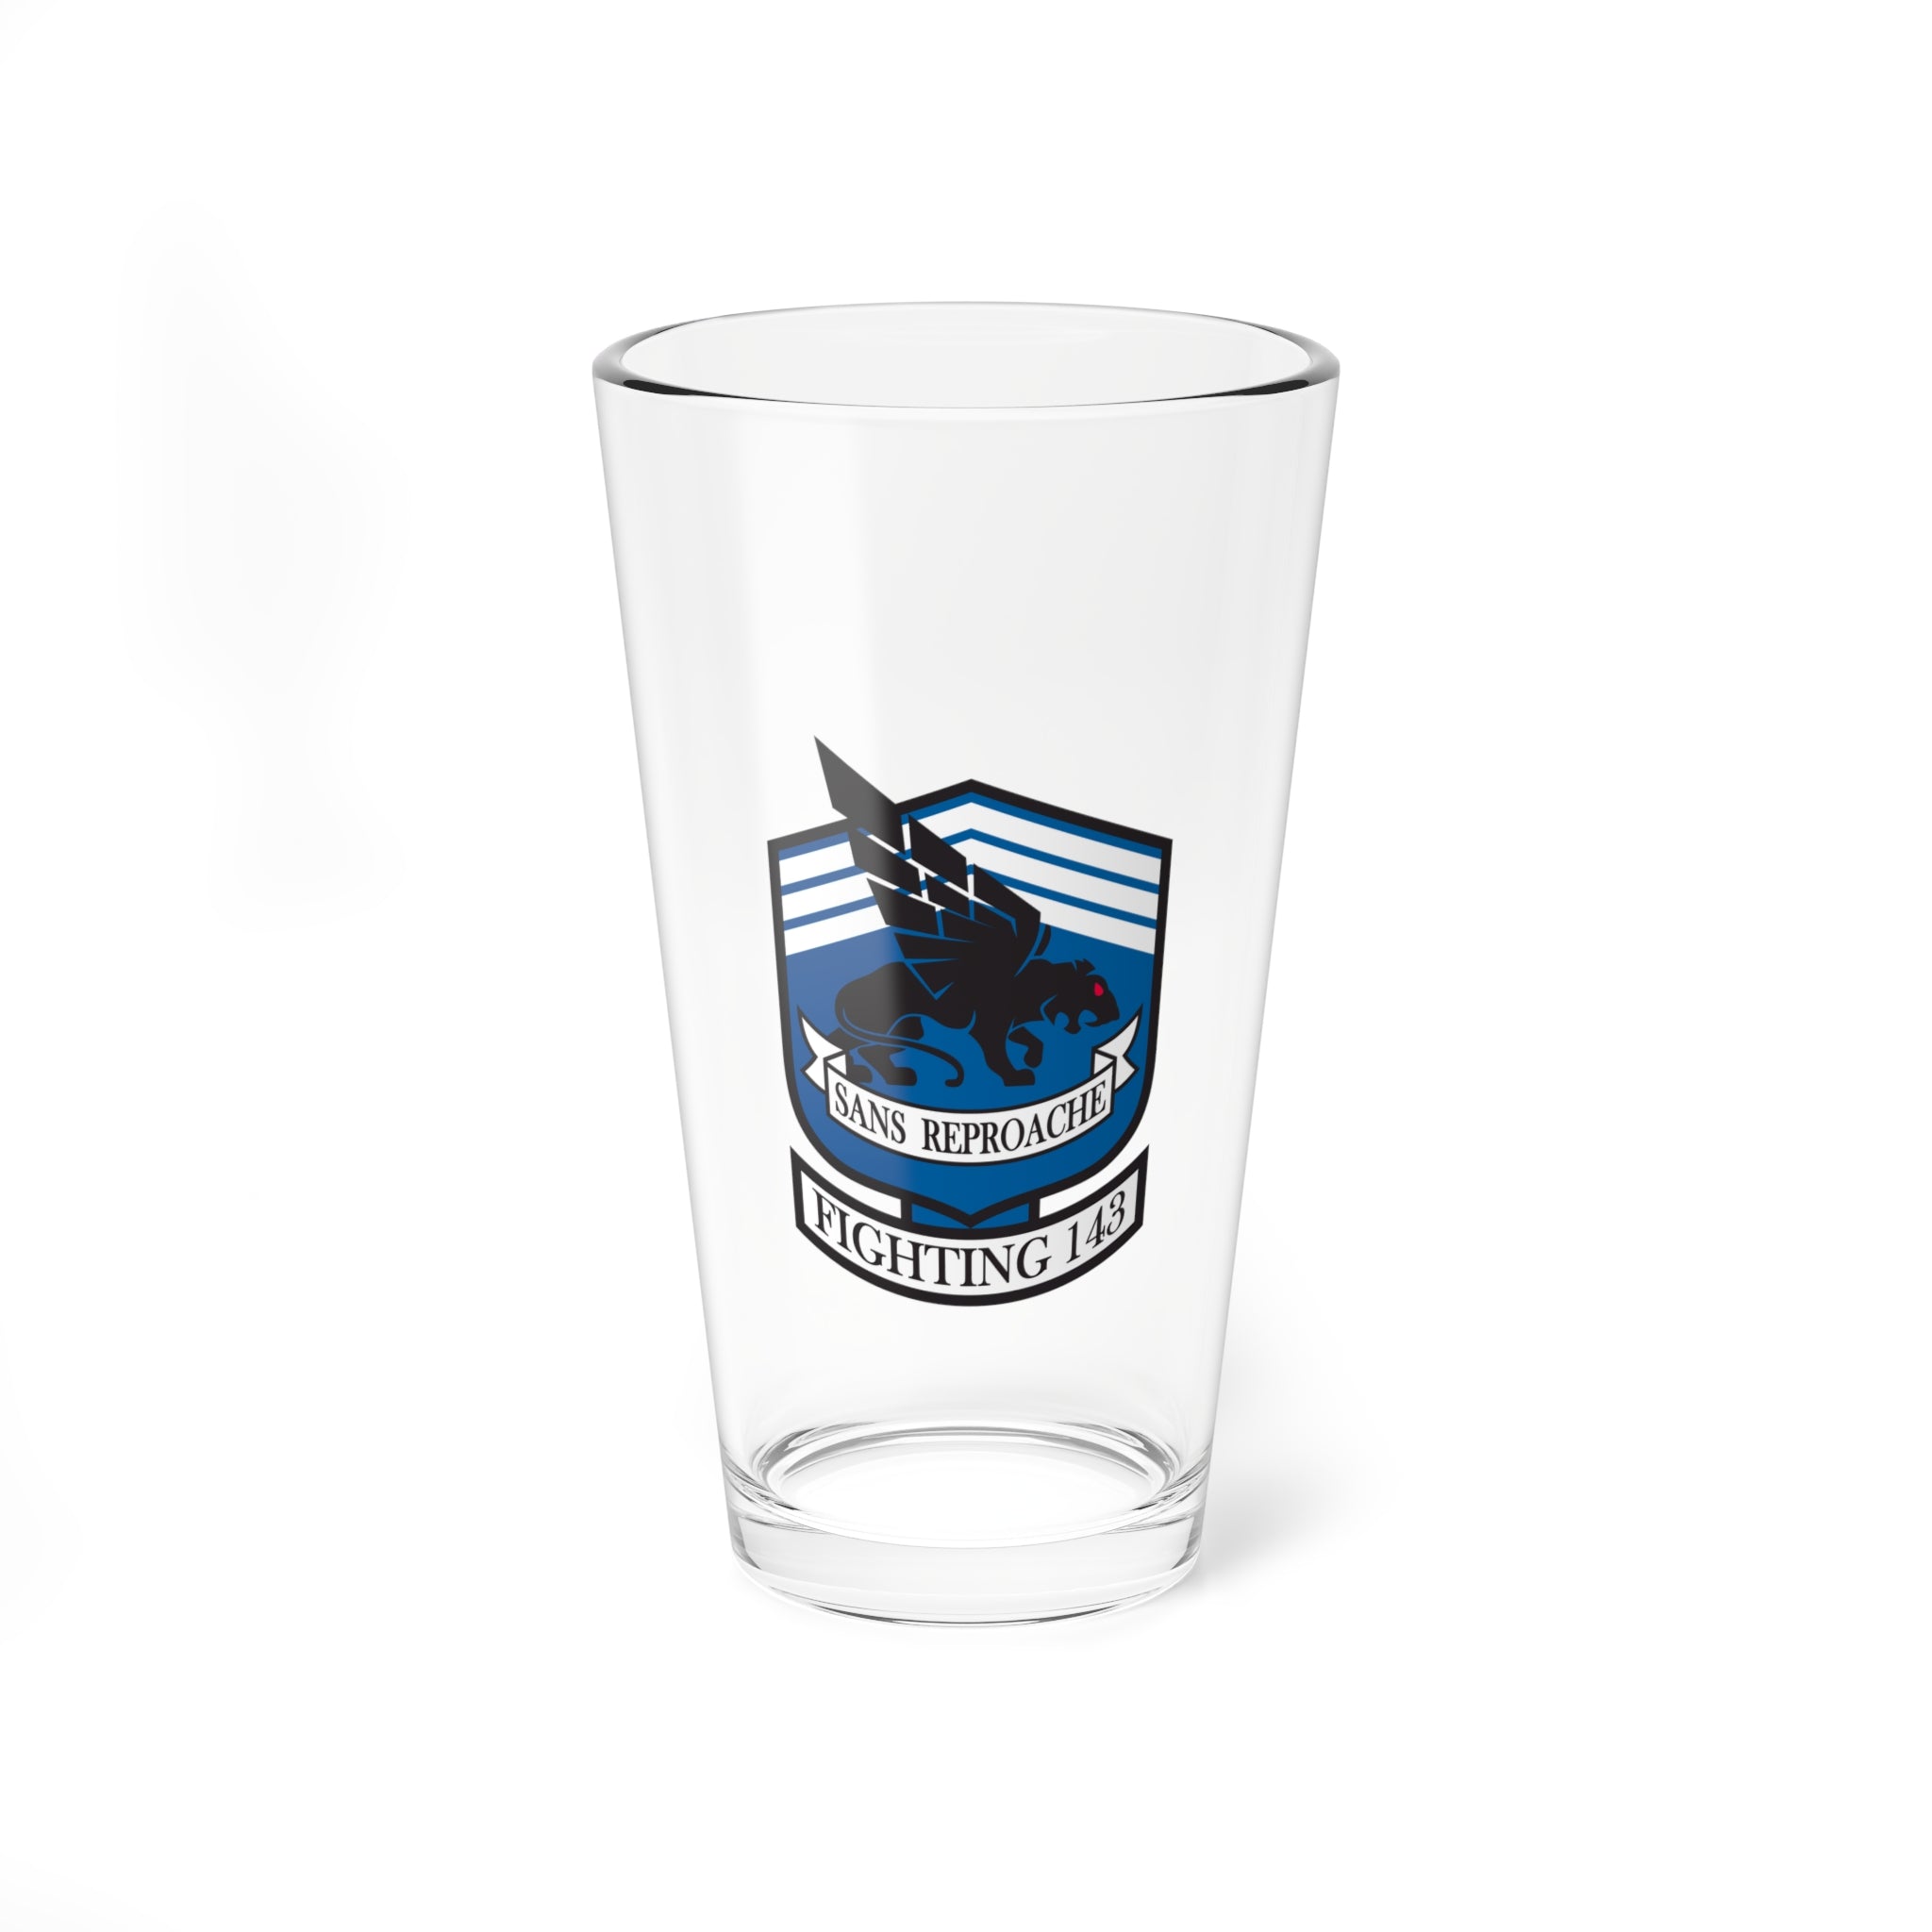 VF-143 "Pukin' Dogs" -No Wings- Pint Glass, 16oz, Navy,  Test and Evaluation, Naval Aviator, Retired, Veteran